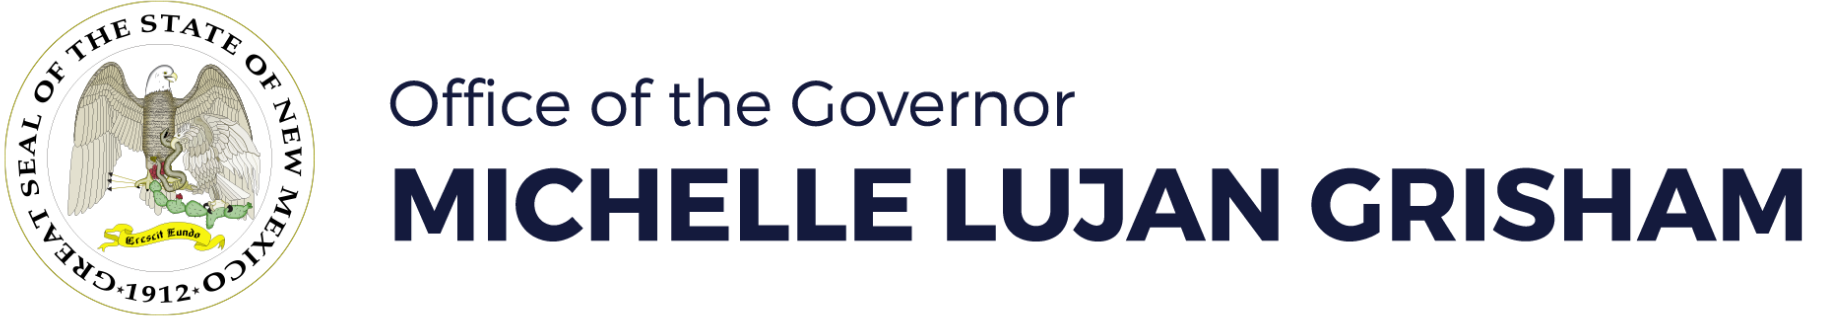 Office of the Governor - Michelle Lujan Grisham logo